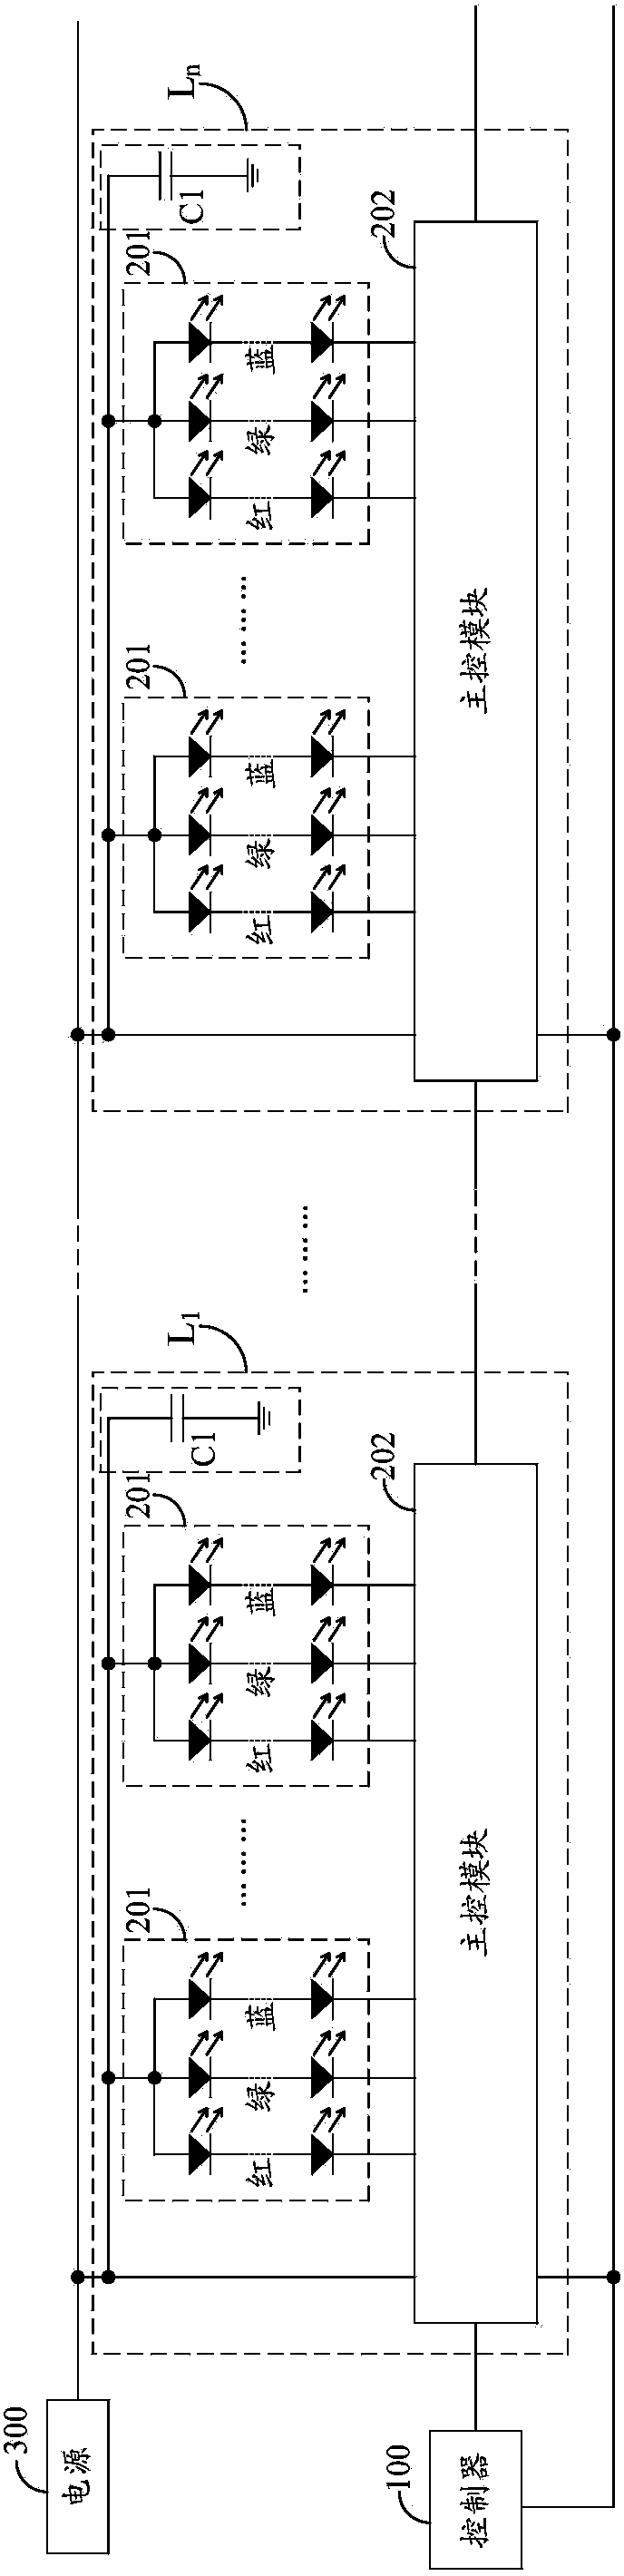 Landscape decorative lamp system and address coding and display control method thereof